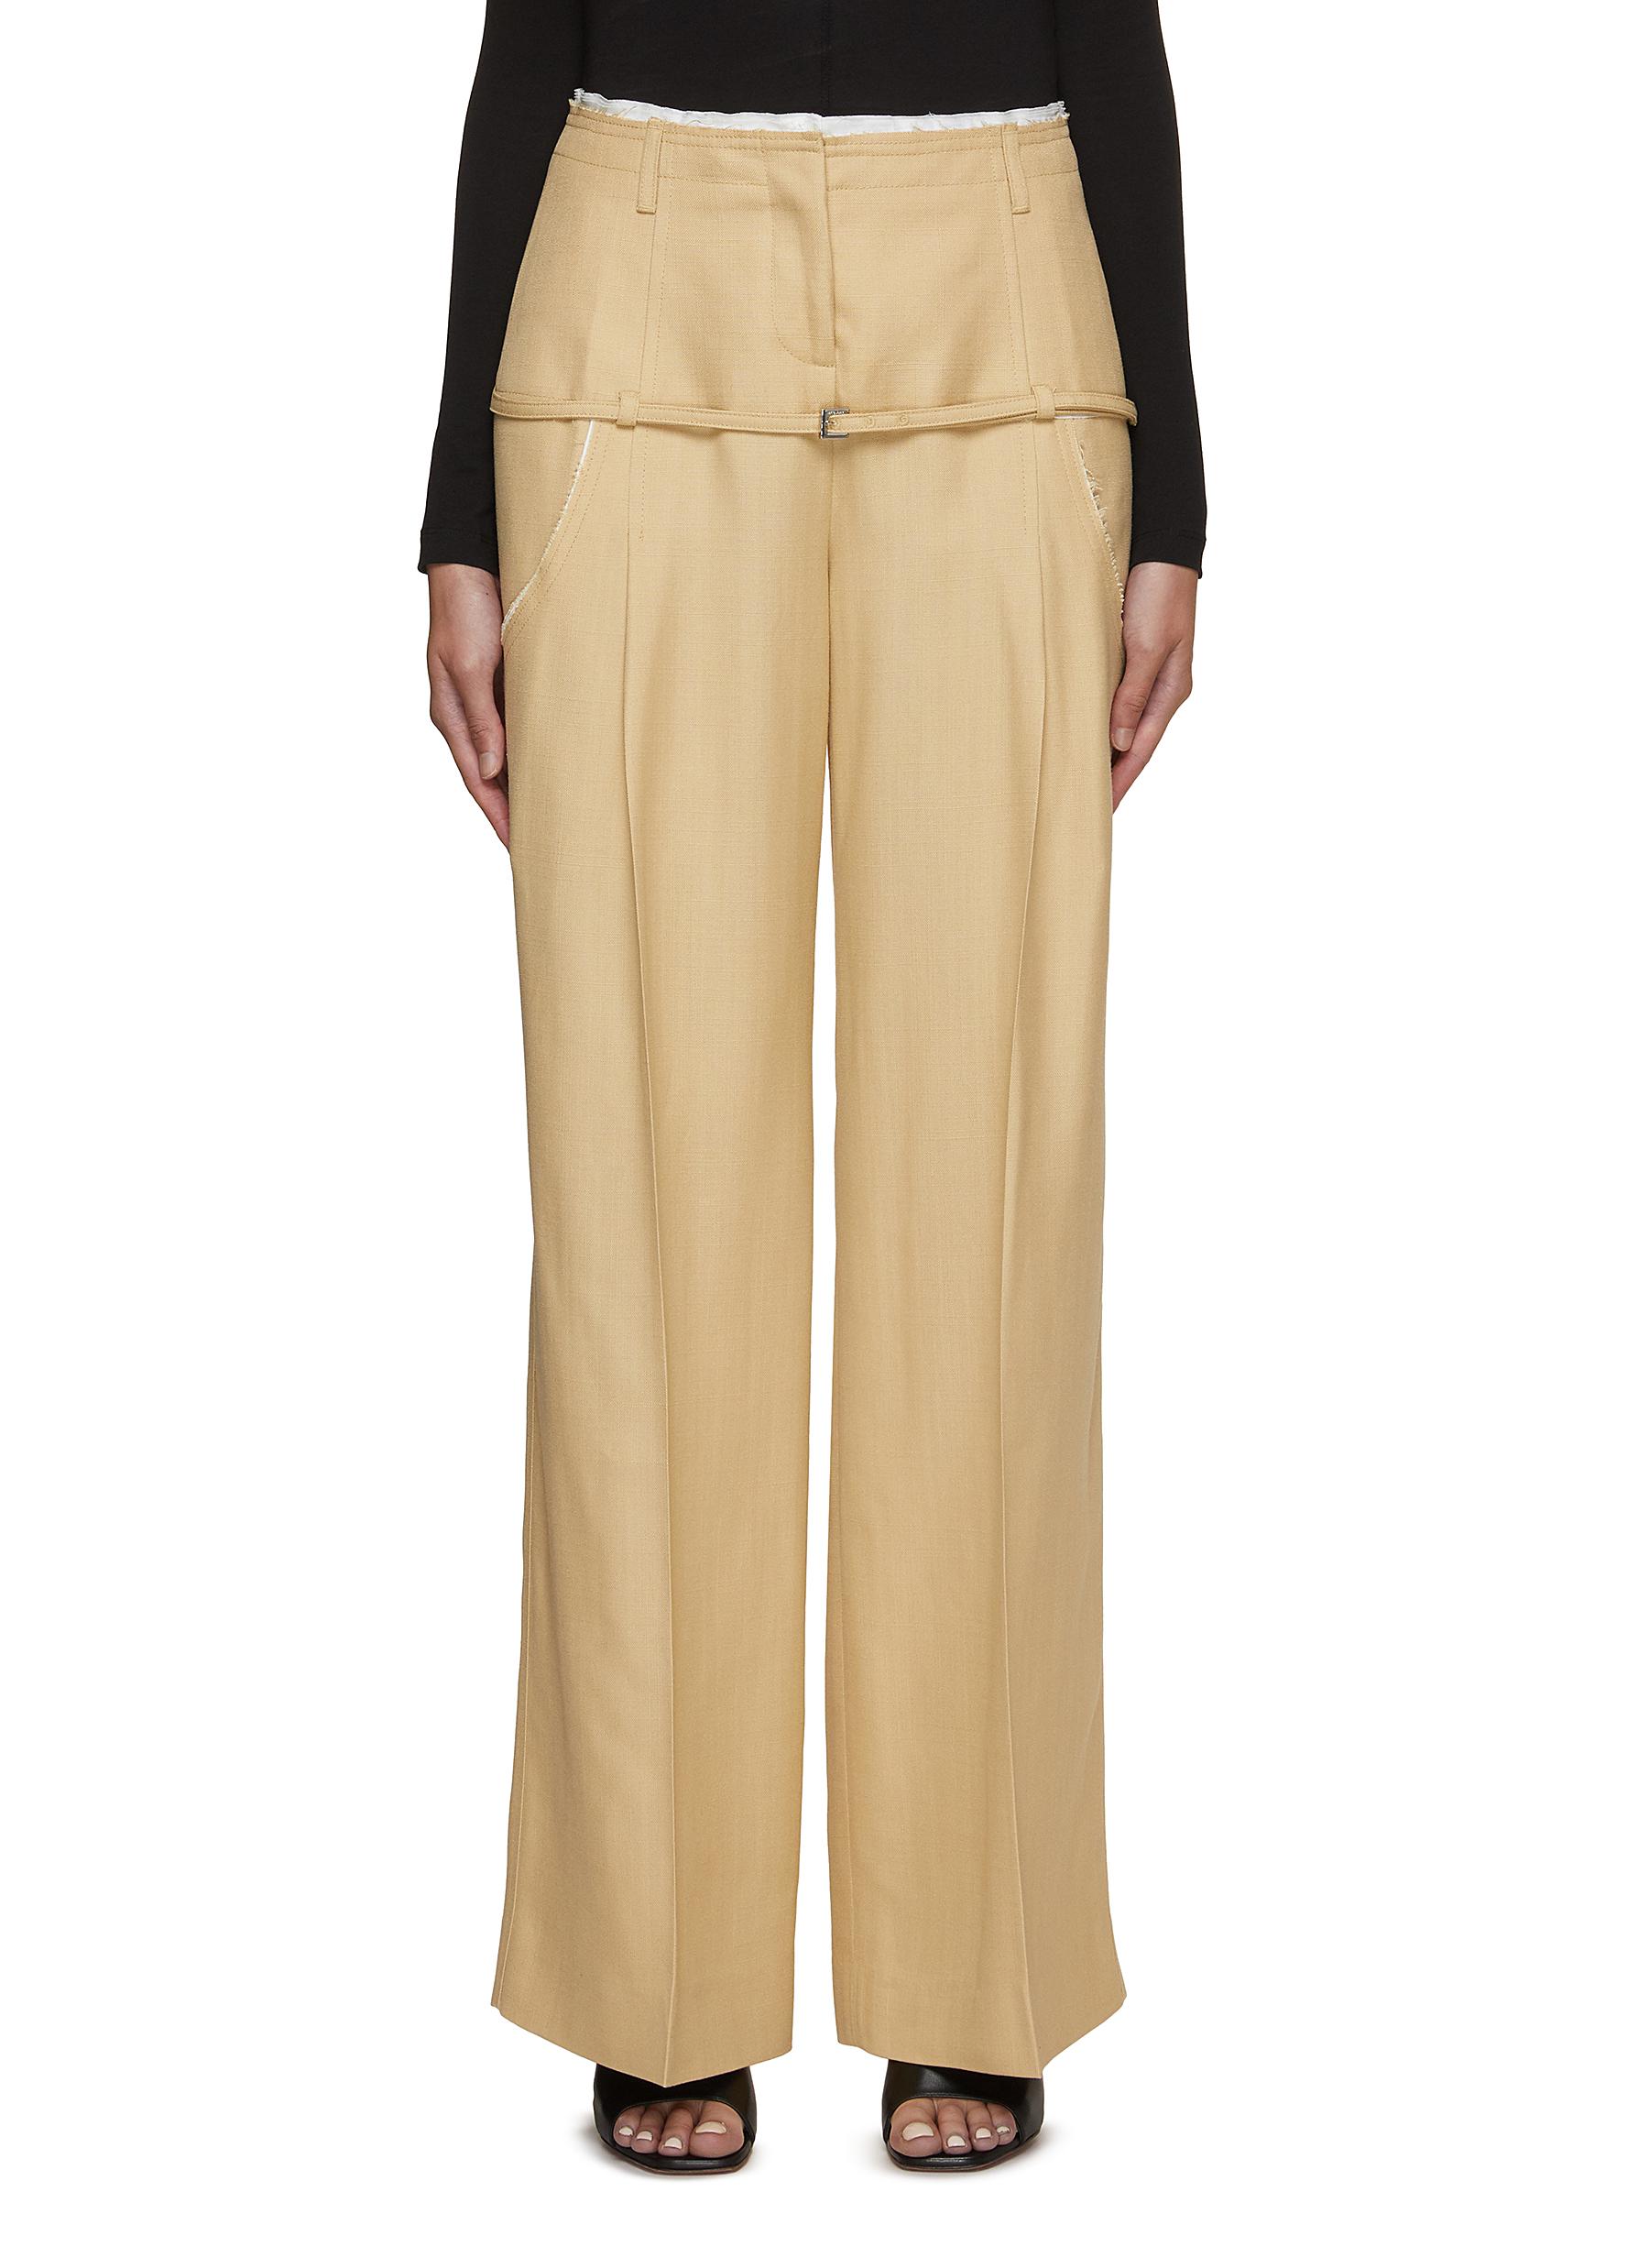 JACQUEMUS | Raw Edge Belted Low Waist Tailored Pants | Women